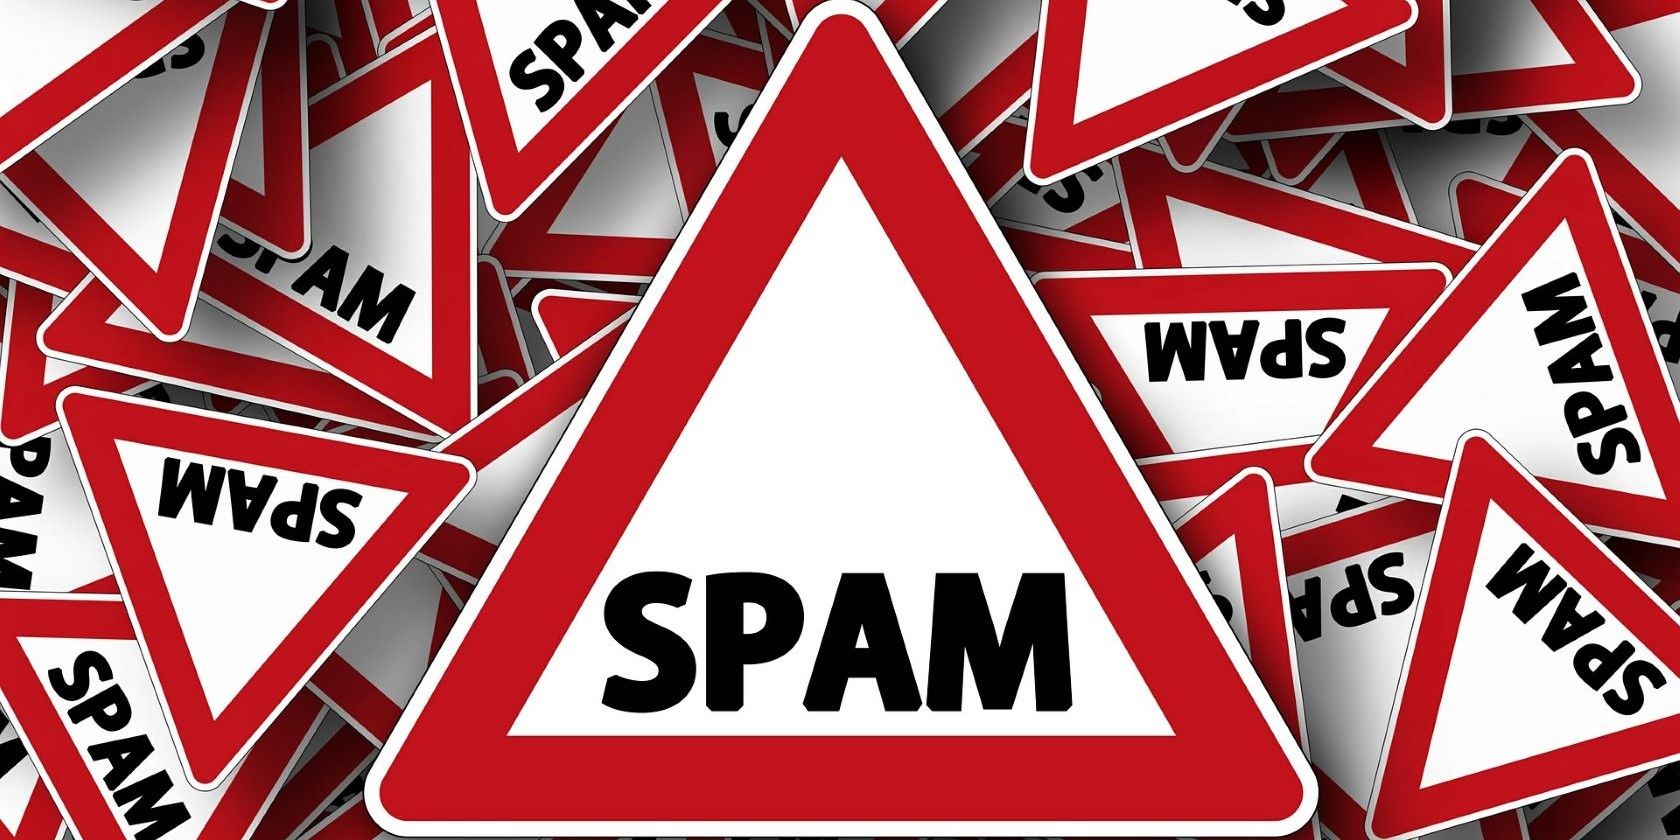 Numerous triangular warning signs displaying the word spam